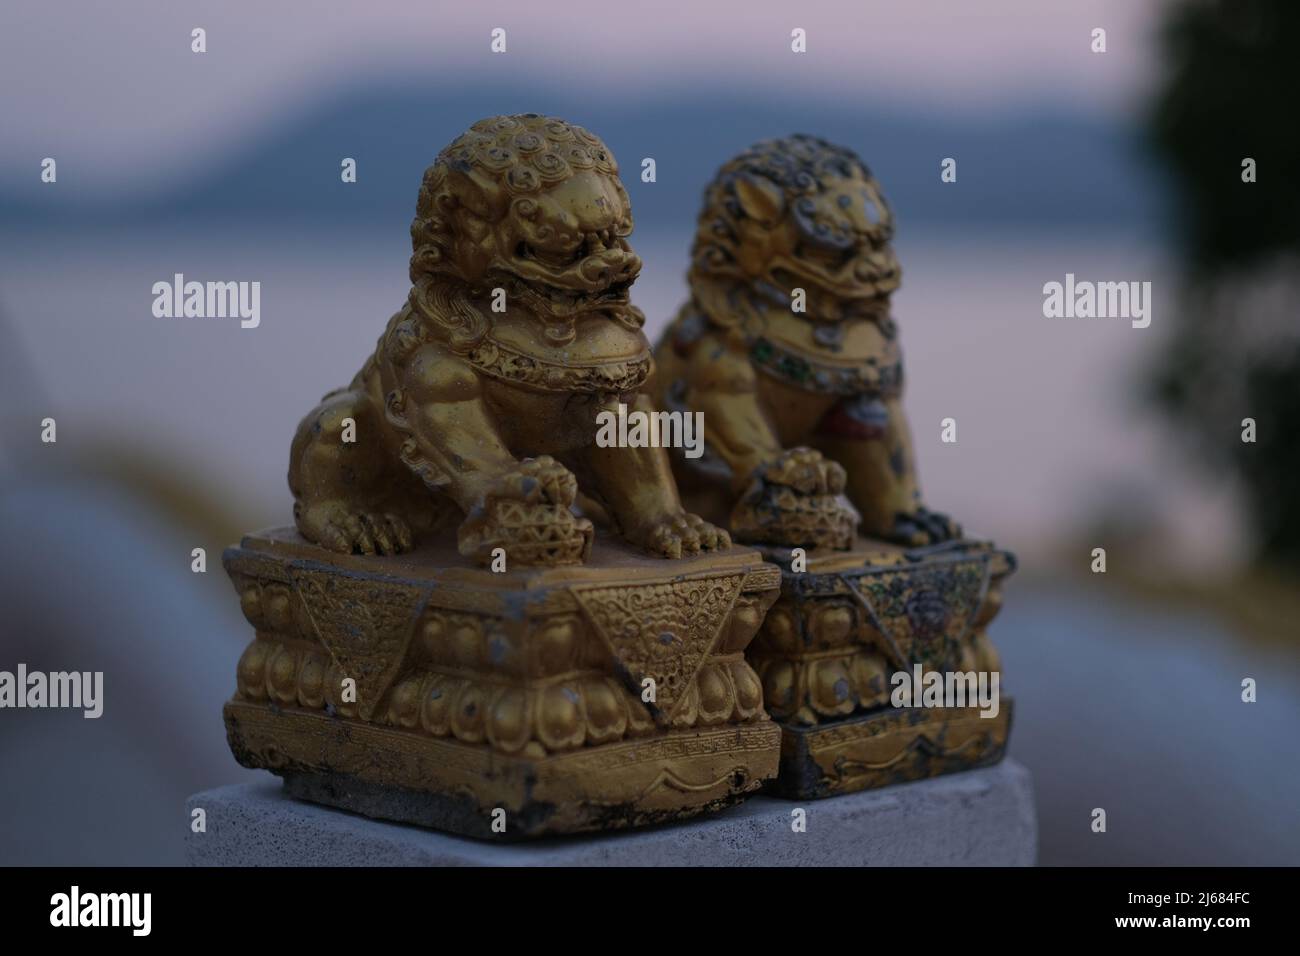 A gold colored statuettes of lavishly decorated lions (or similar mythological creations)  near Buddhist temple in Thailand Stock Photo